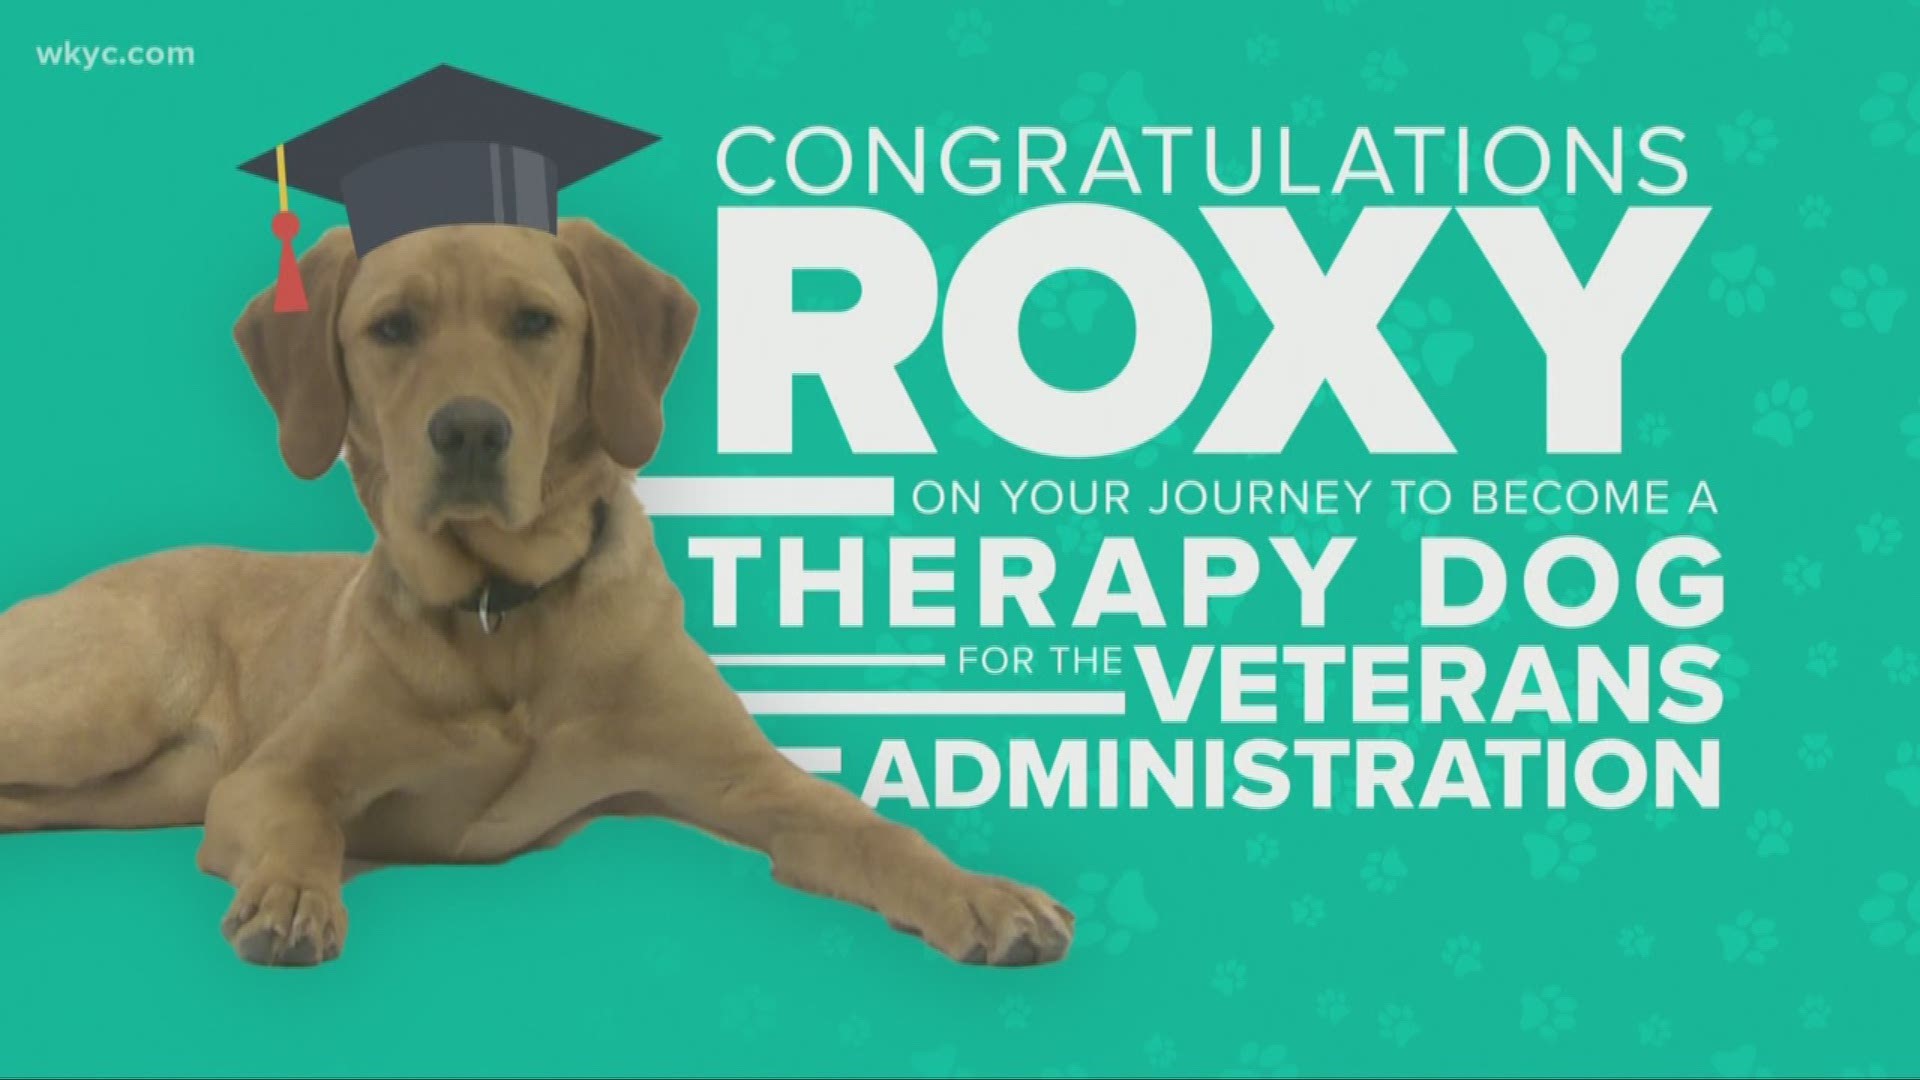 Roxy! We are so proud of you! Our puppy with a purpose has come a long way. She's now becoming a therapy dog for veterans in need.